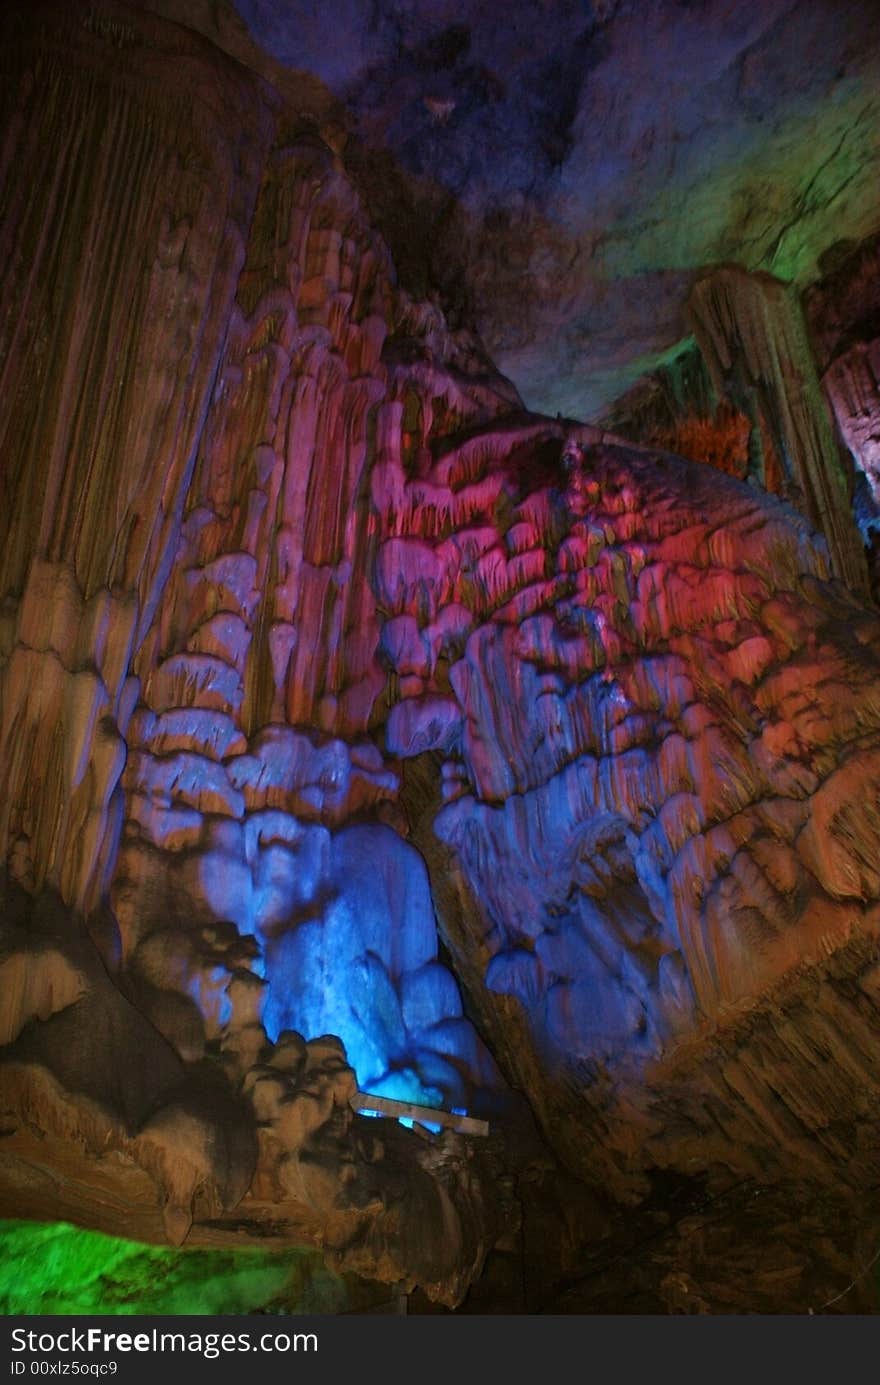 Yaolin Wonderland is a group of limestone caves formed by corrosion through the ages. With stalagmites and peak stones in fantastic shapes and colours as well as murmuring streams, pools and cliffs, its halls are interconnected with passages and many chambers. Yaolin Wonderland stretches one kilometer in depth and covers an area of 28,000 square meters. It ranks second on the list of newly developed natural scenic spots among the Forty Best Tourist Resorts in China. Yaolin Wonderland is a group of limestone caves formed by corrosion through the ages. With stalagmites and peak stones in fantastic shapes and colours as well as murmuring streams, pools and cliffs, its halls are interconnected with passages and many chambers. Yaolin Wonderland stretches one kilometer in depth and covers an area of 28,000 square meters. It ranks second on the list of newly developed natural scenic spots among the Forty Best Tourist Resorts in China.